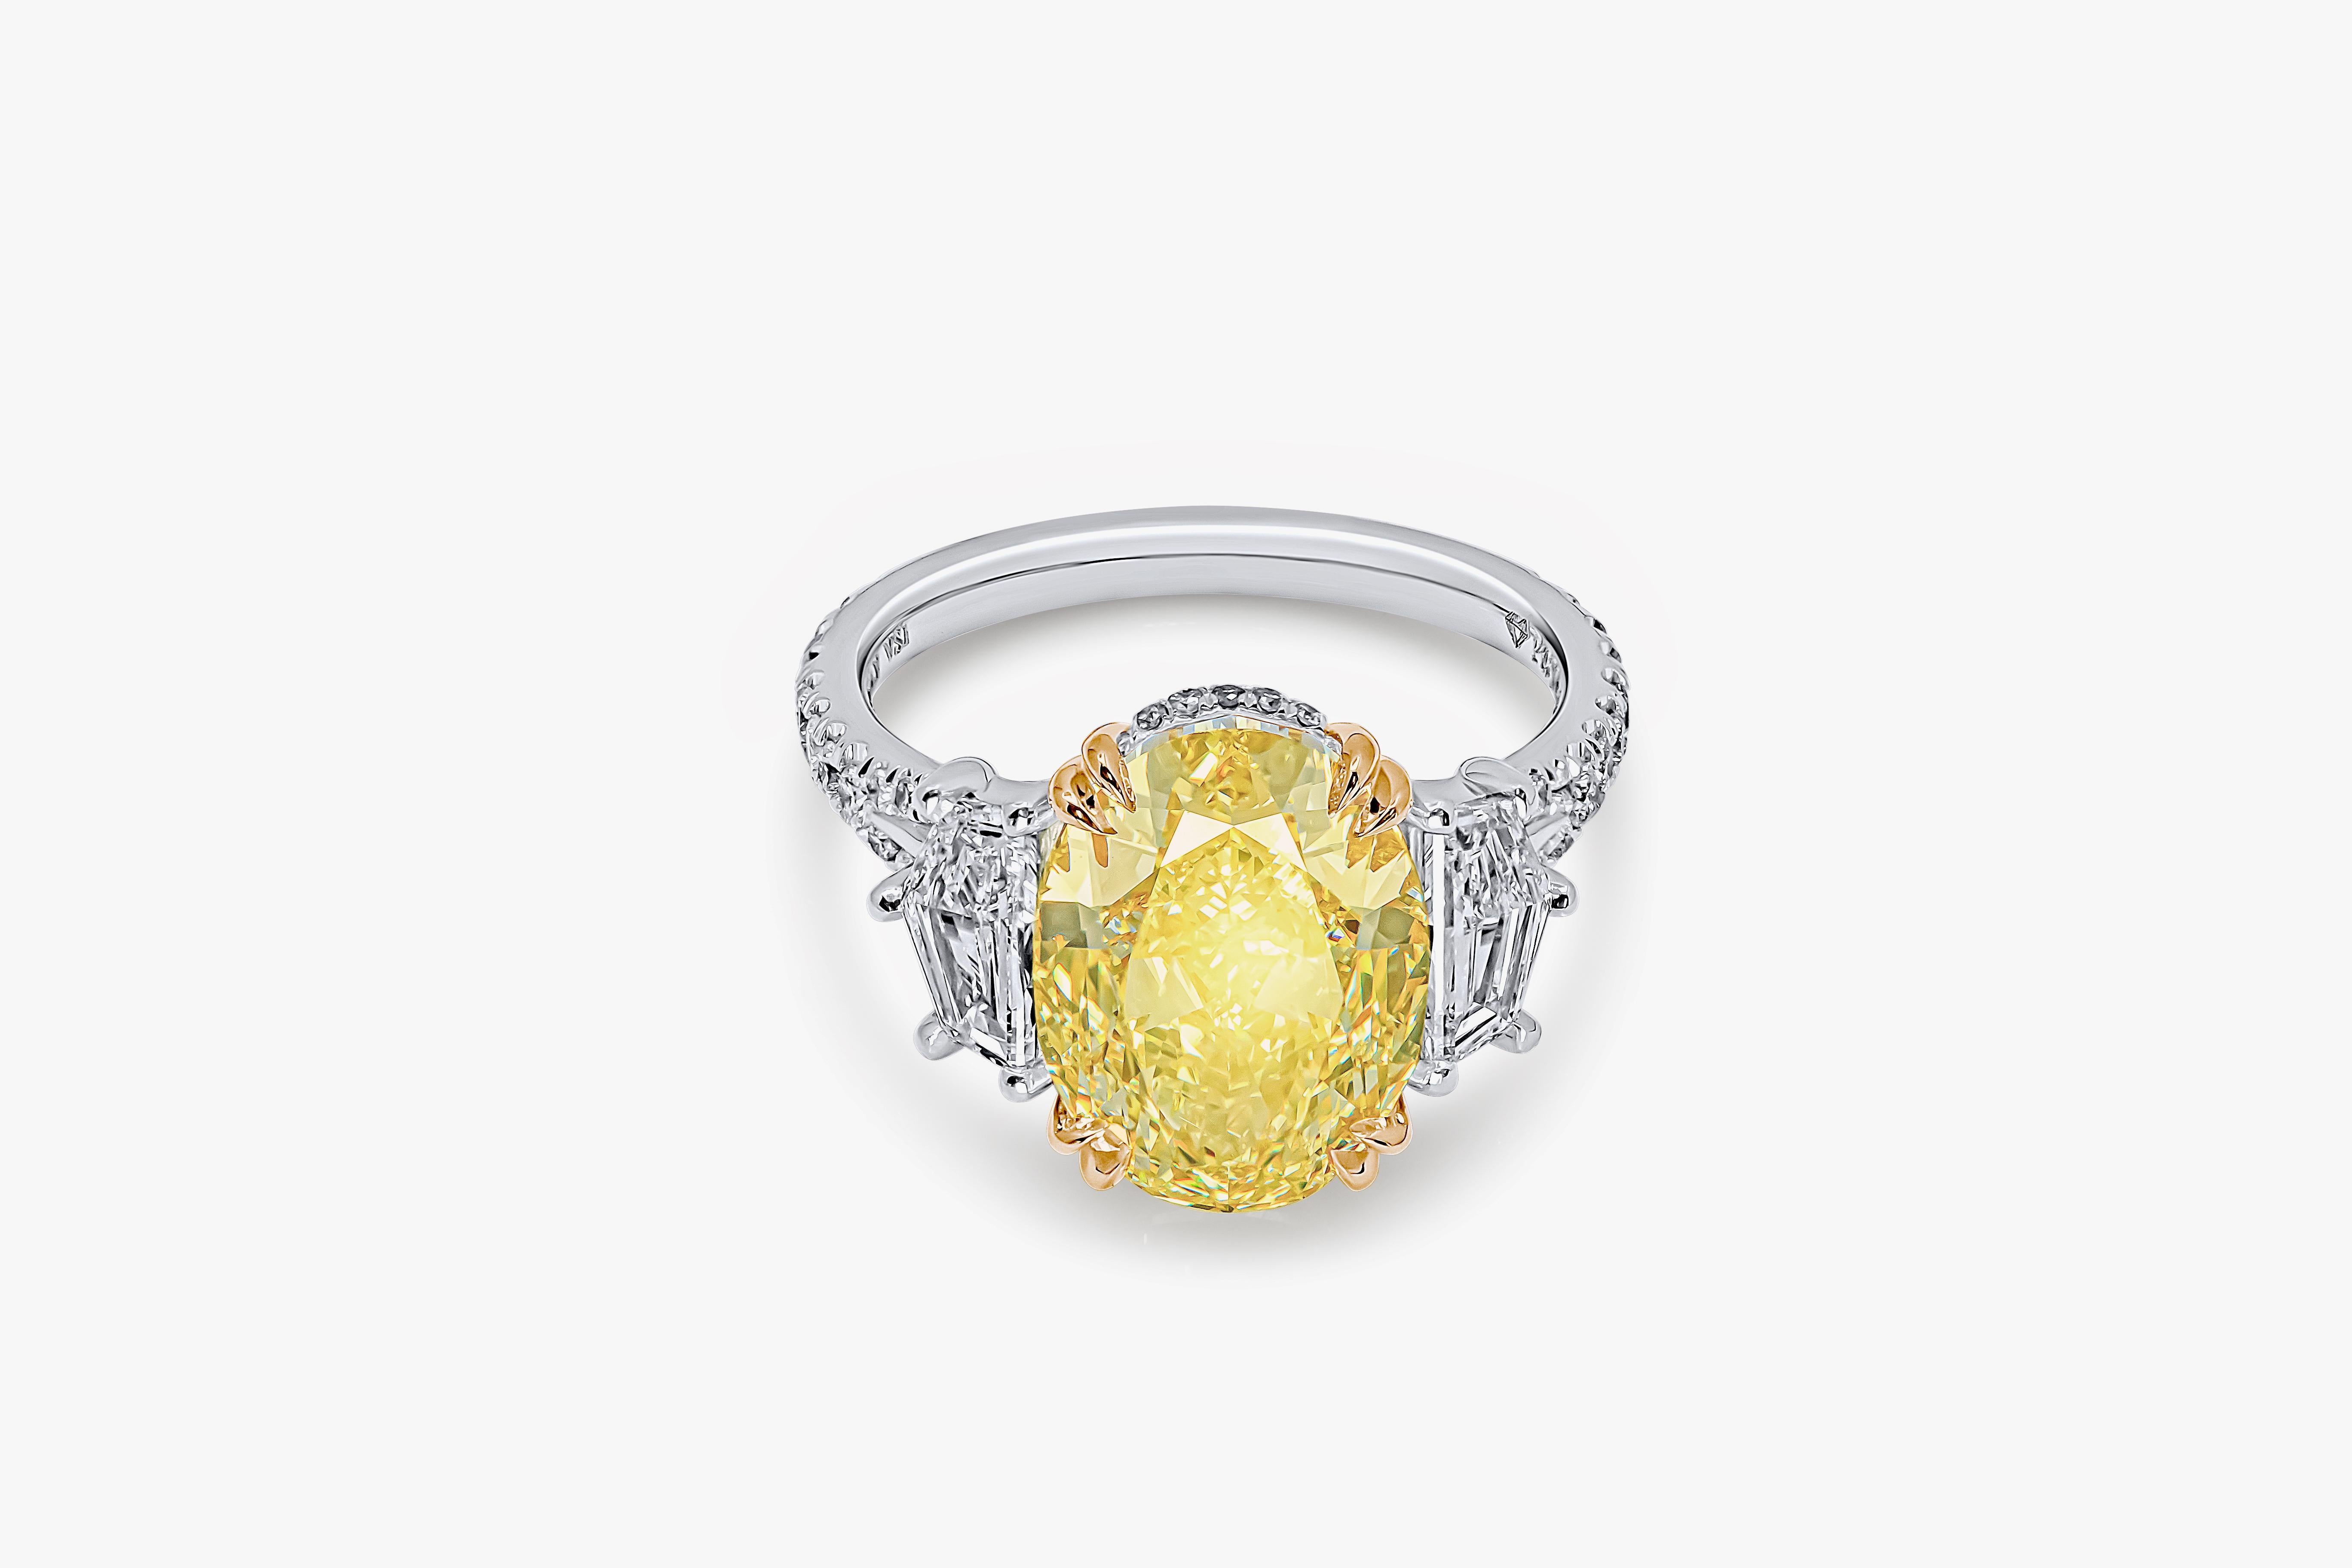 Modern GIA Certified 3 Stone Ring with 5.52ct Fancy Yellow  VS1  Oval Diamond